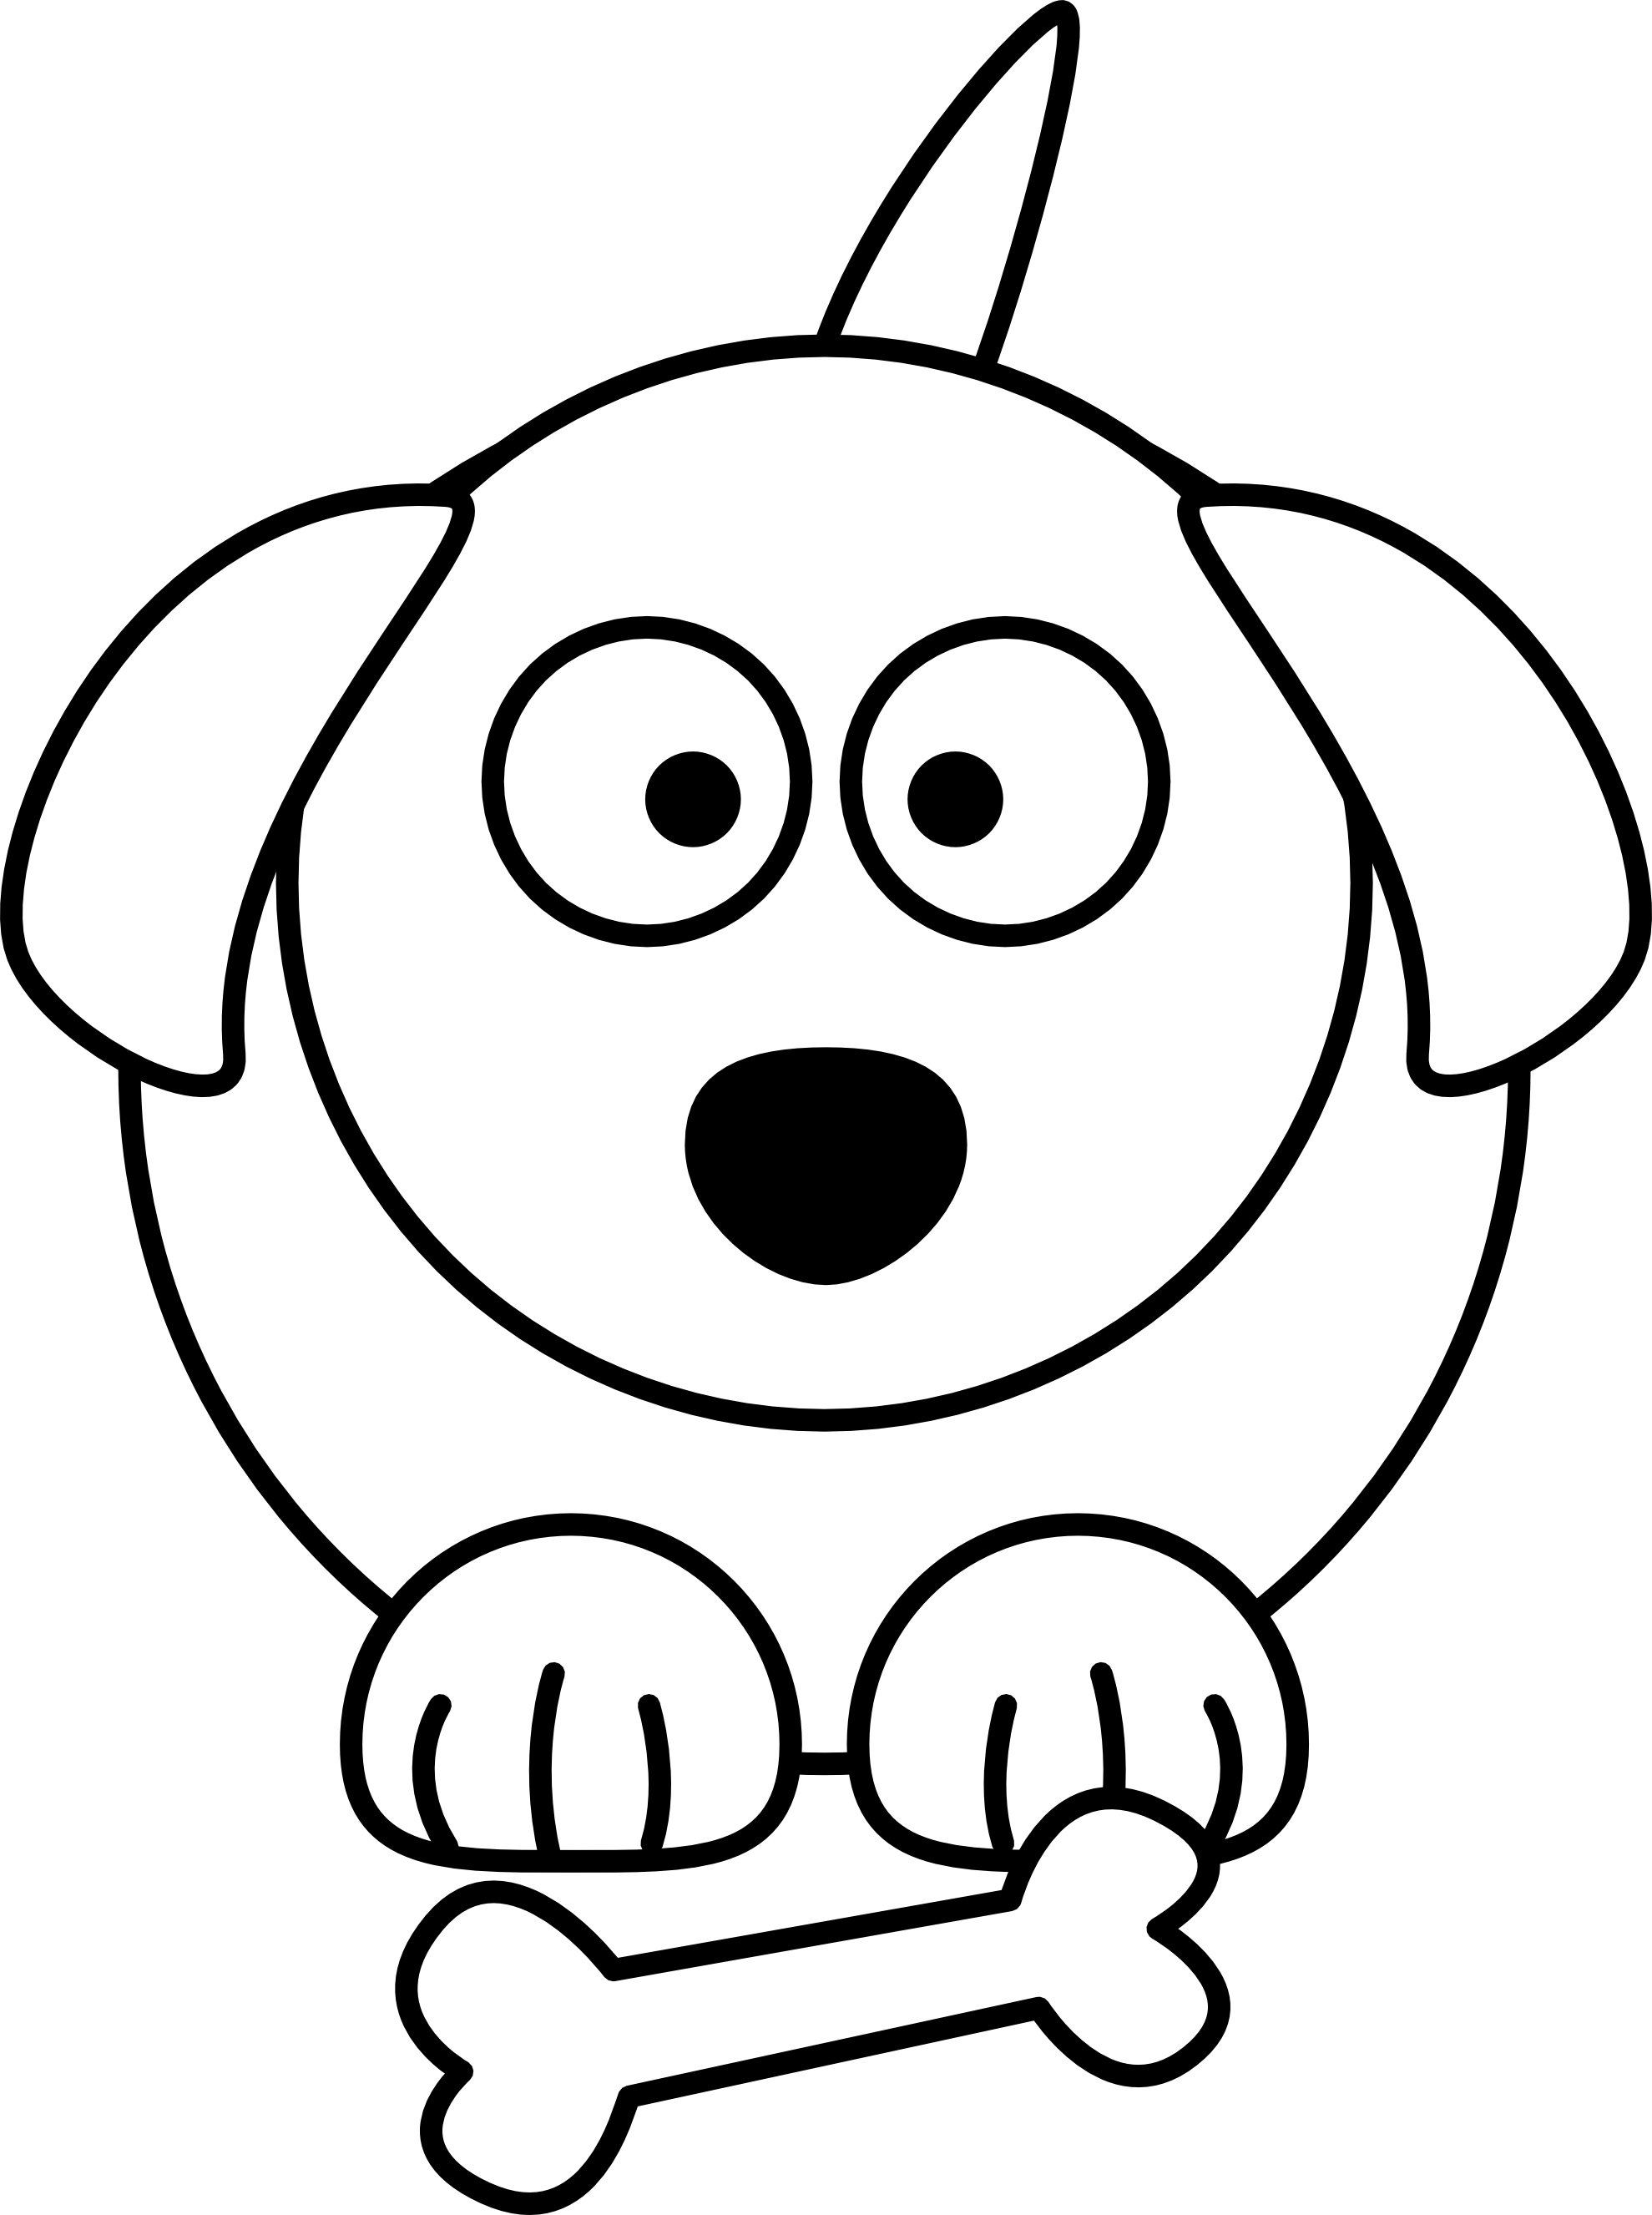 21 Black And White Cartoon Animals Free Cliparts That You Can Download